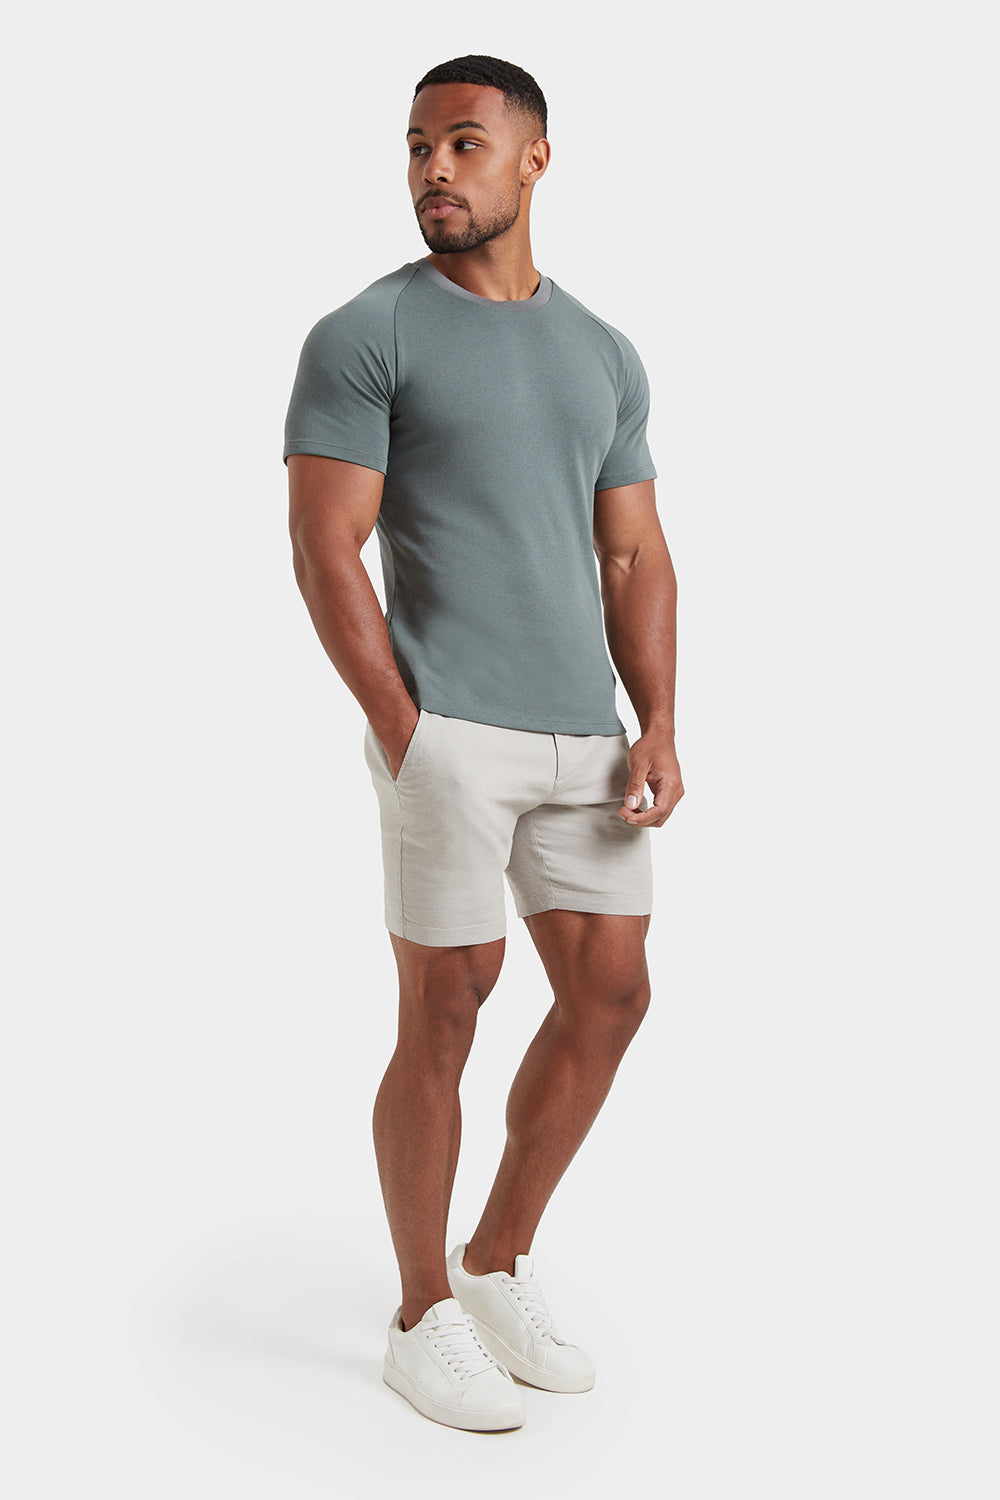 Knit Look T-Shirt in Khaki Grey - TAILORED ATHLETE - ROW